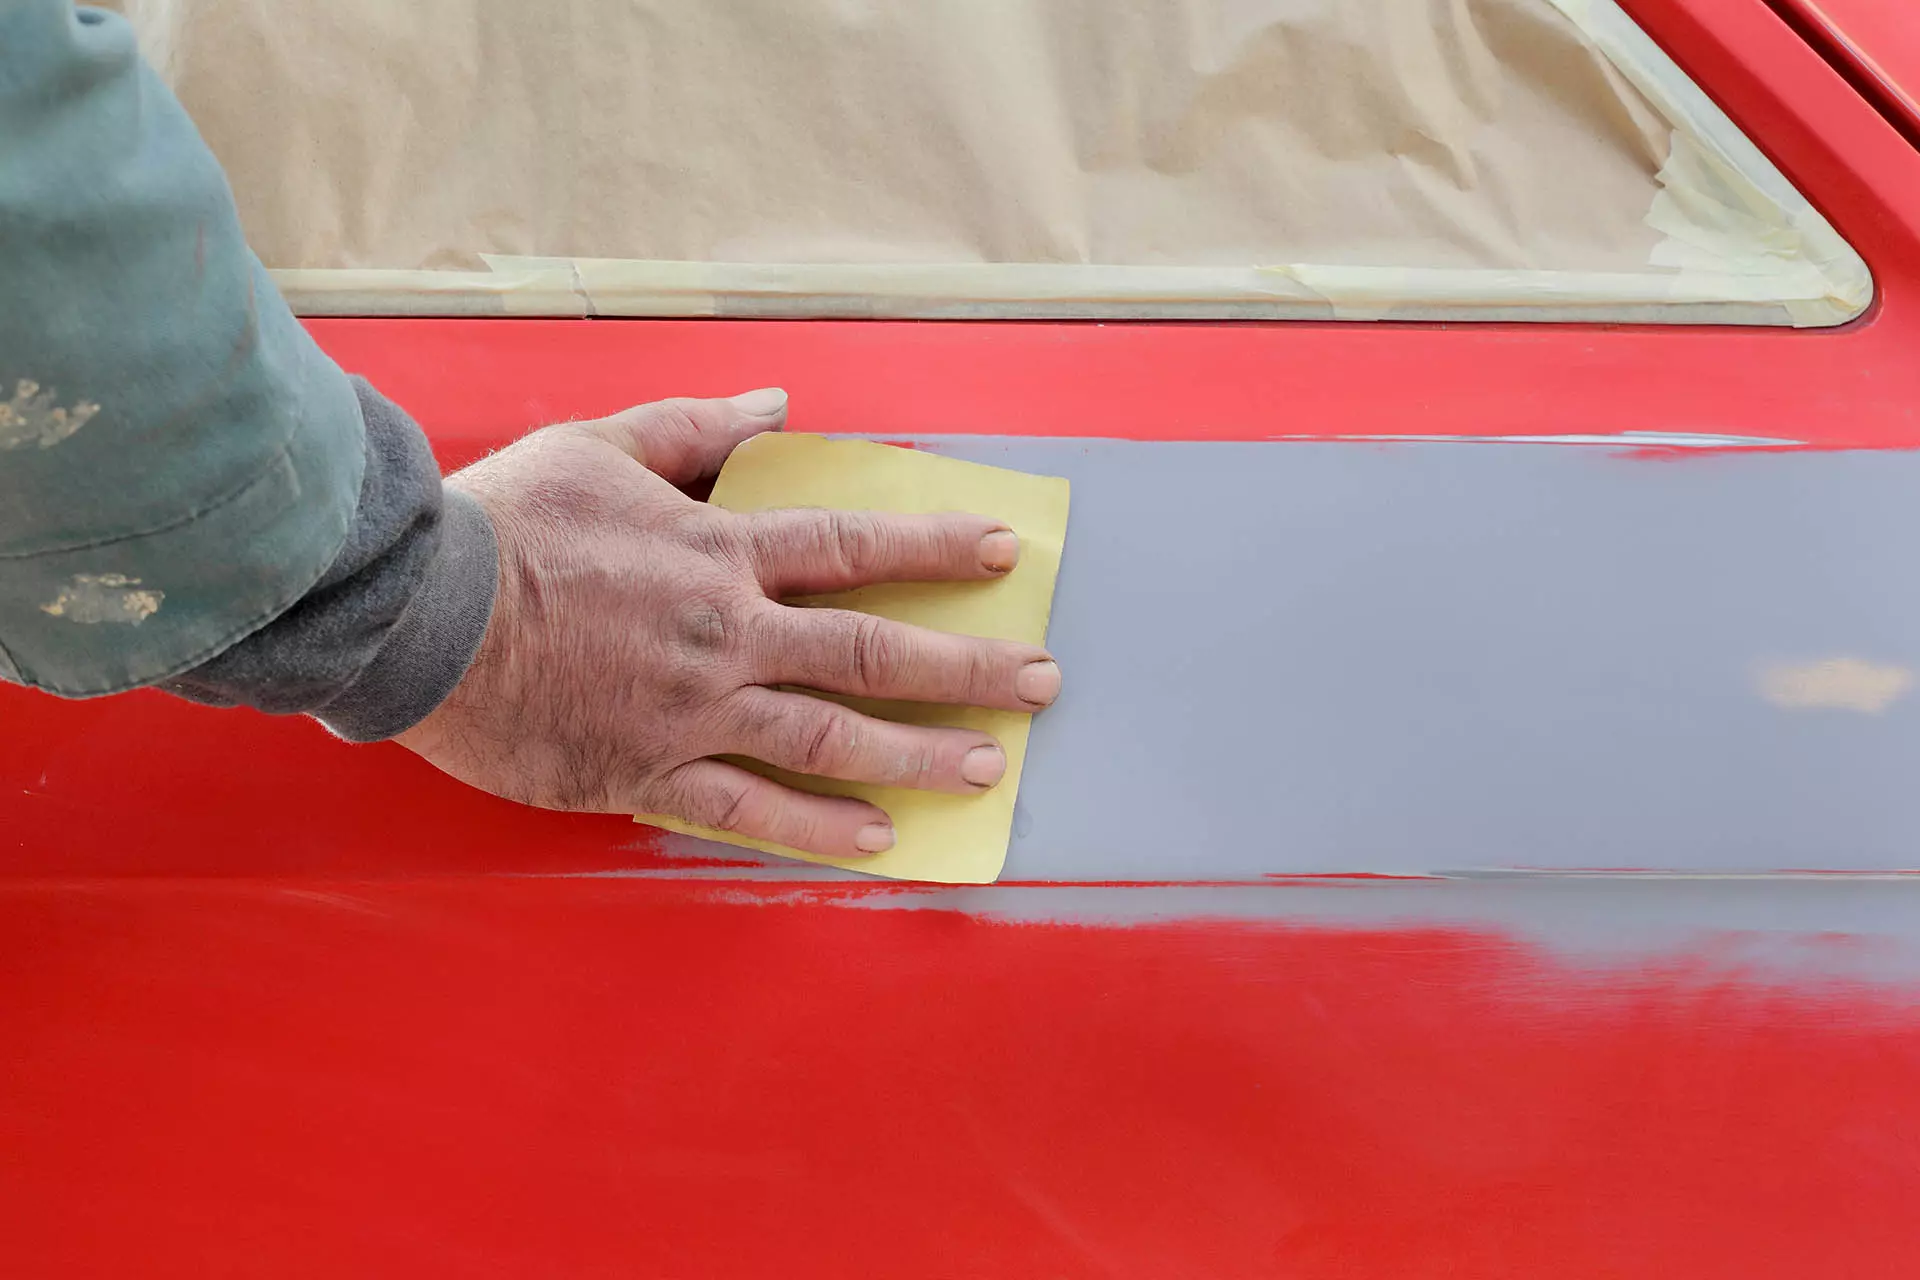 What Is Primer Paint and How to Apply It to Your Car - Haynes Manuals